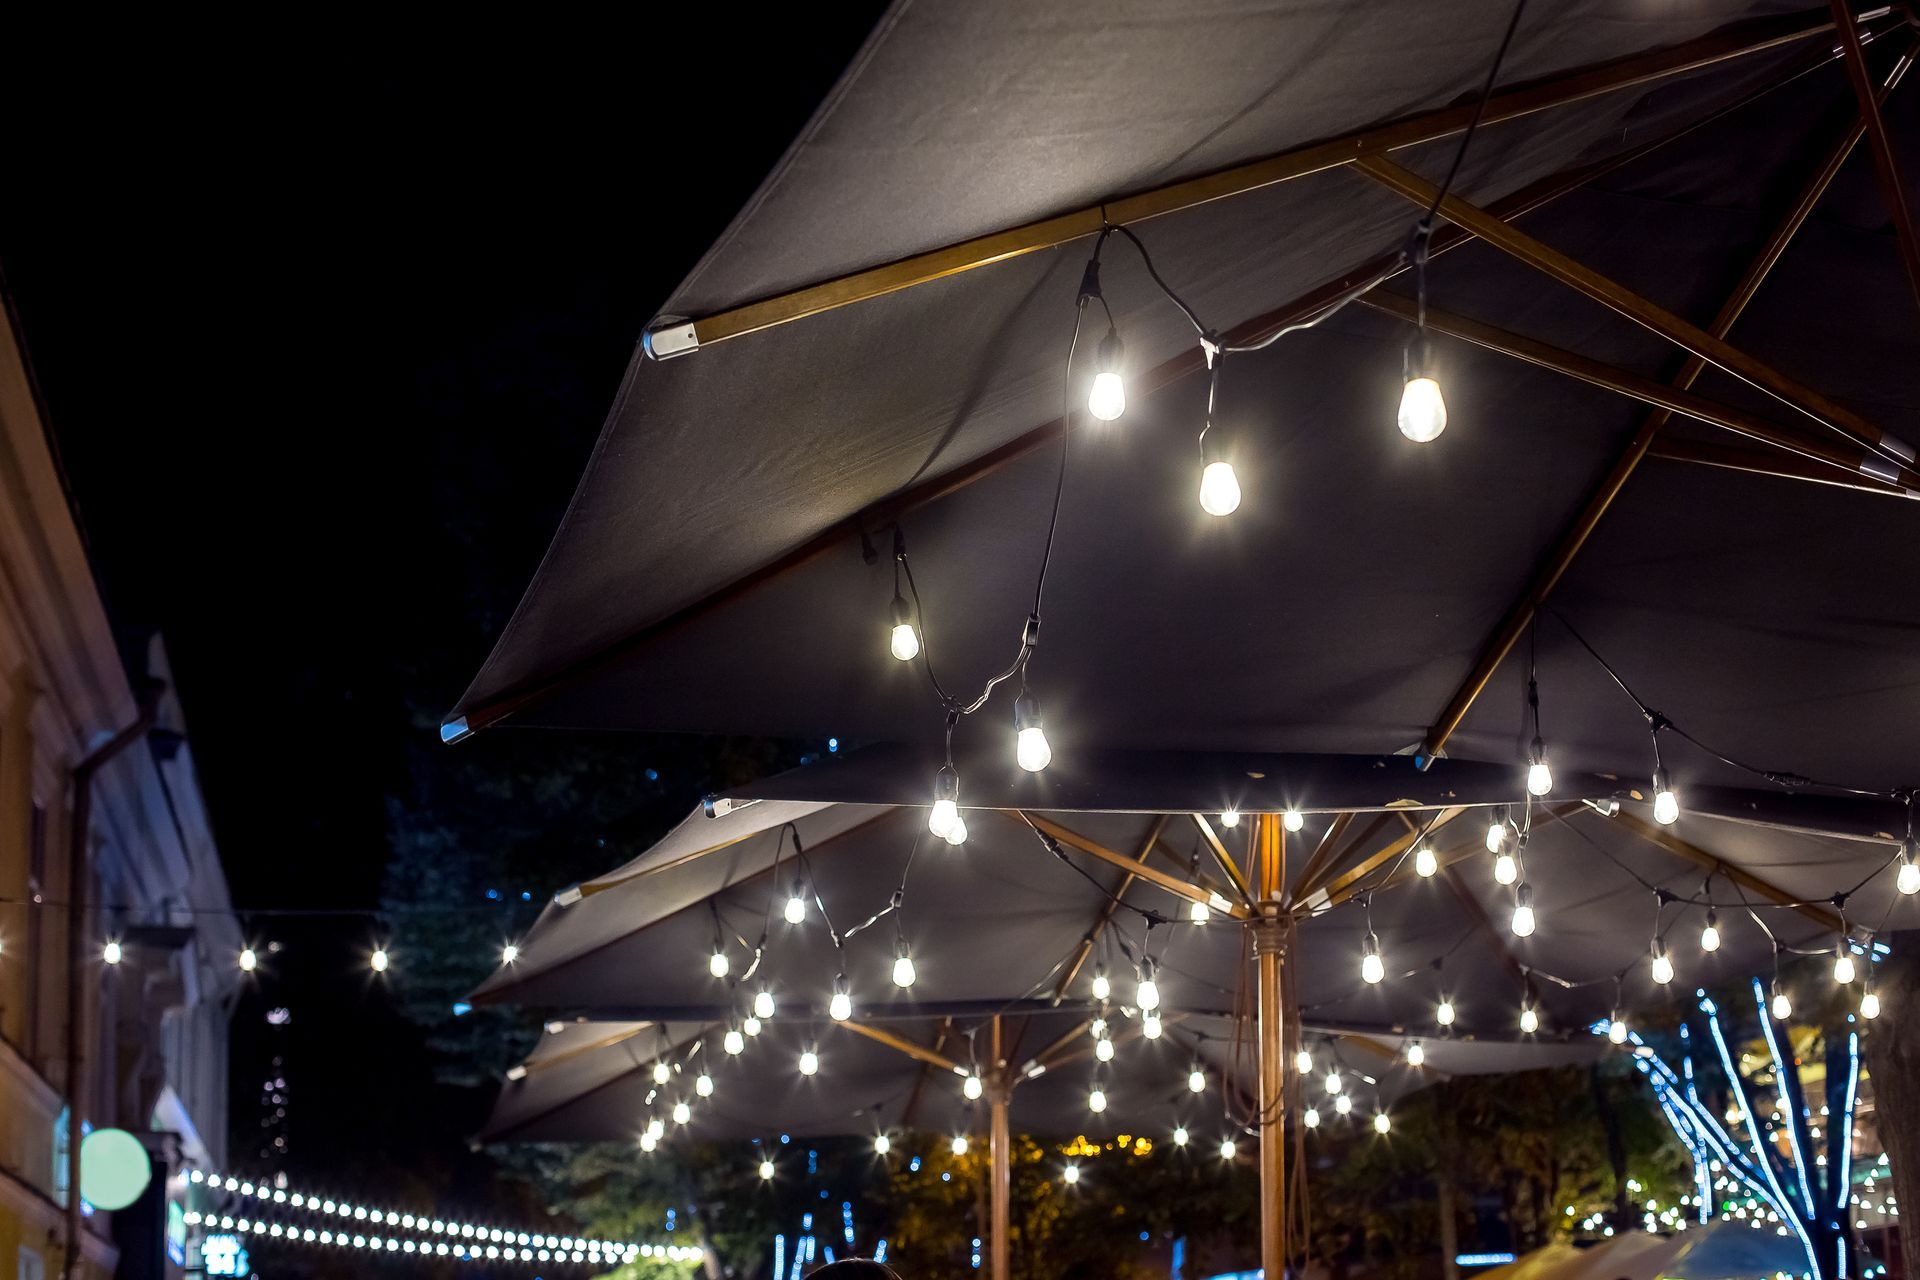 Types of Lighting Options for Awnings